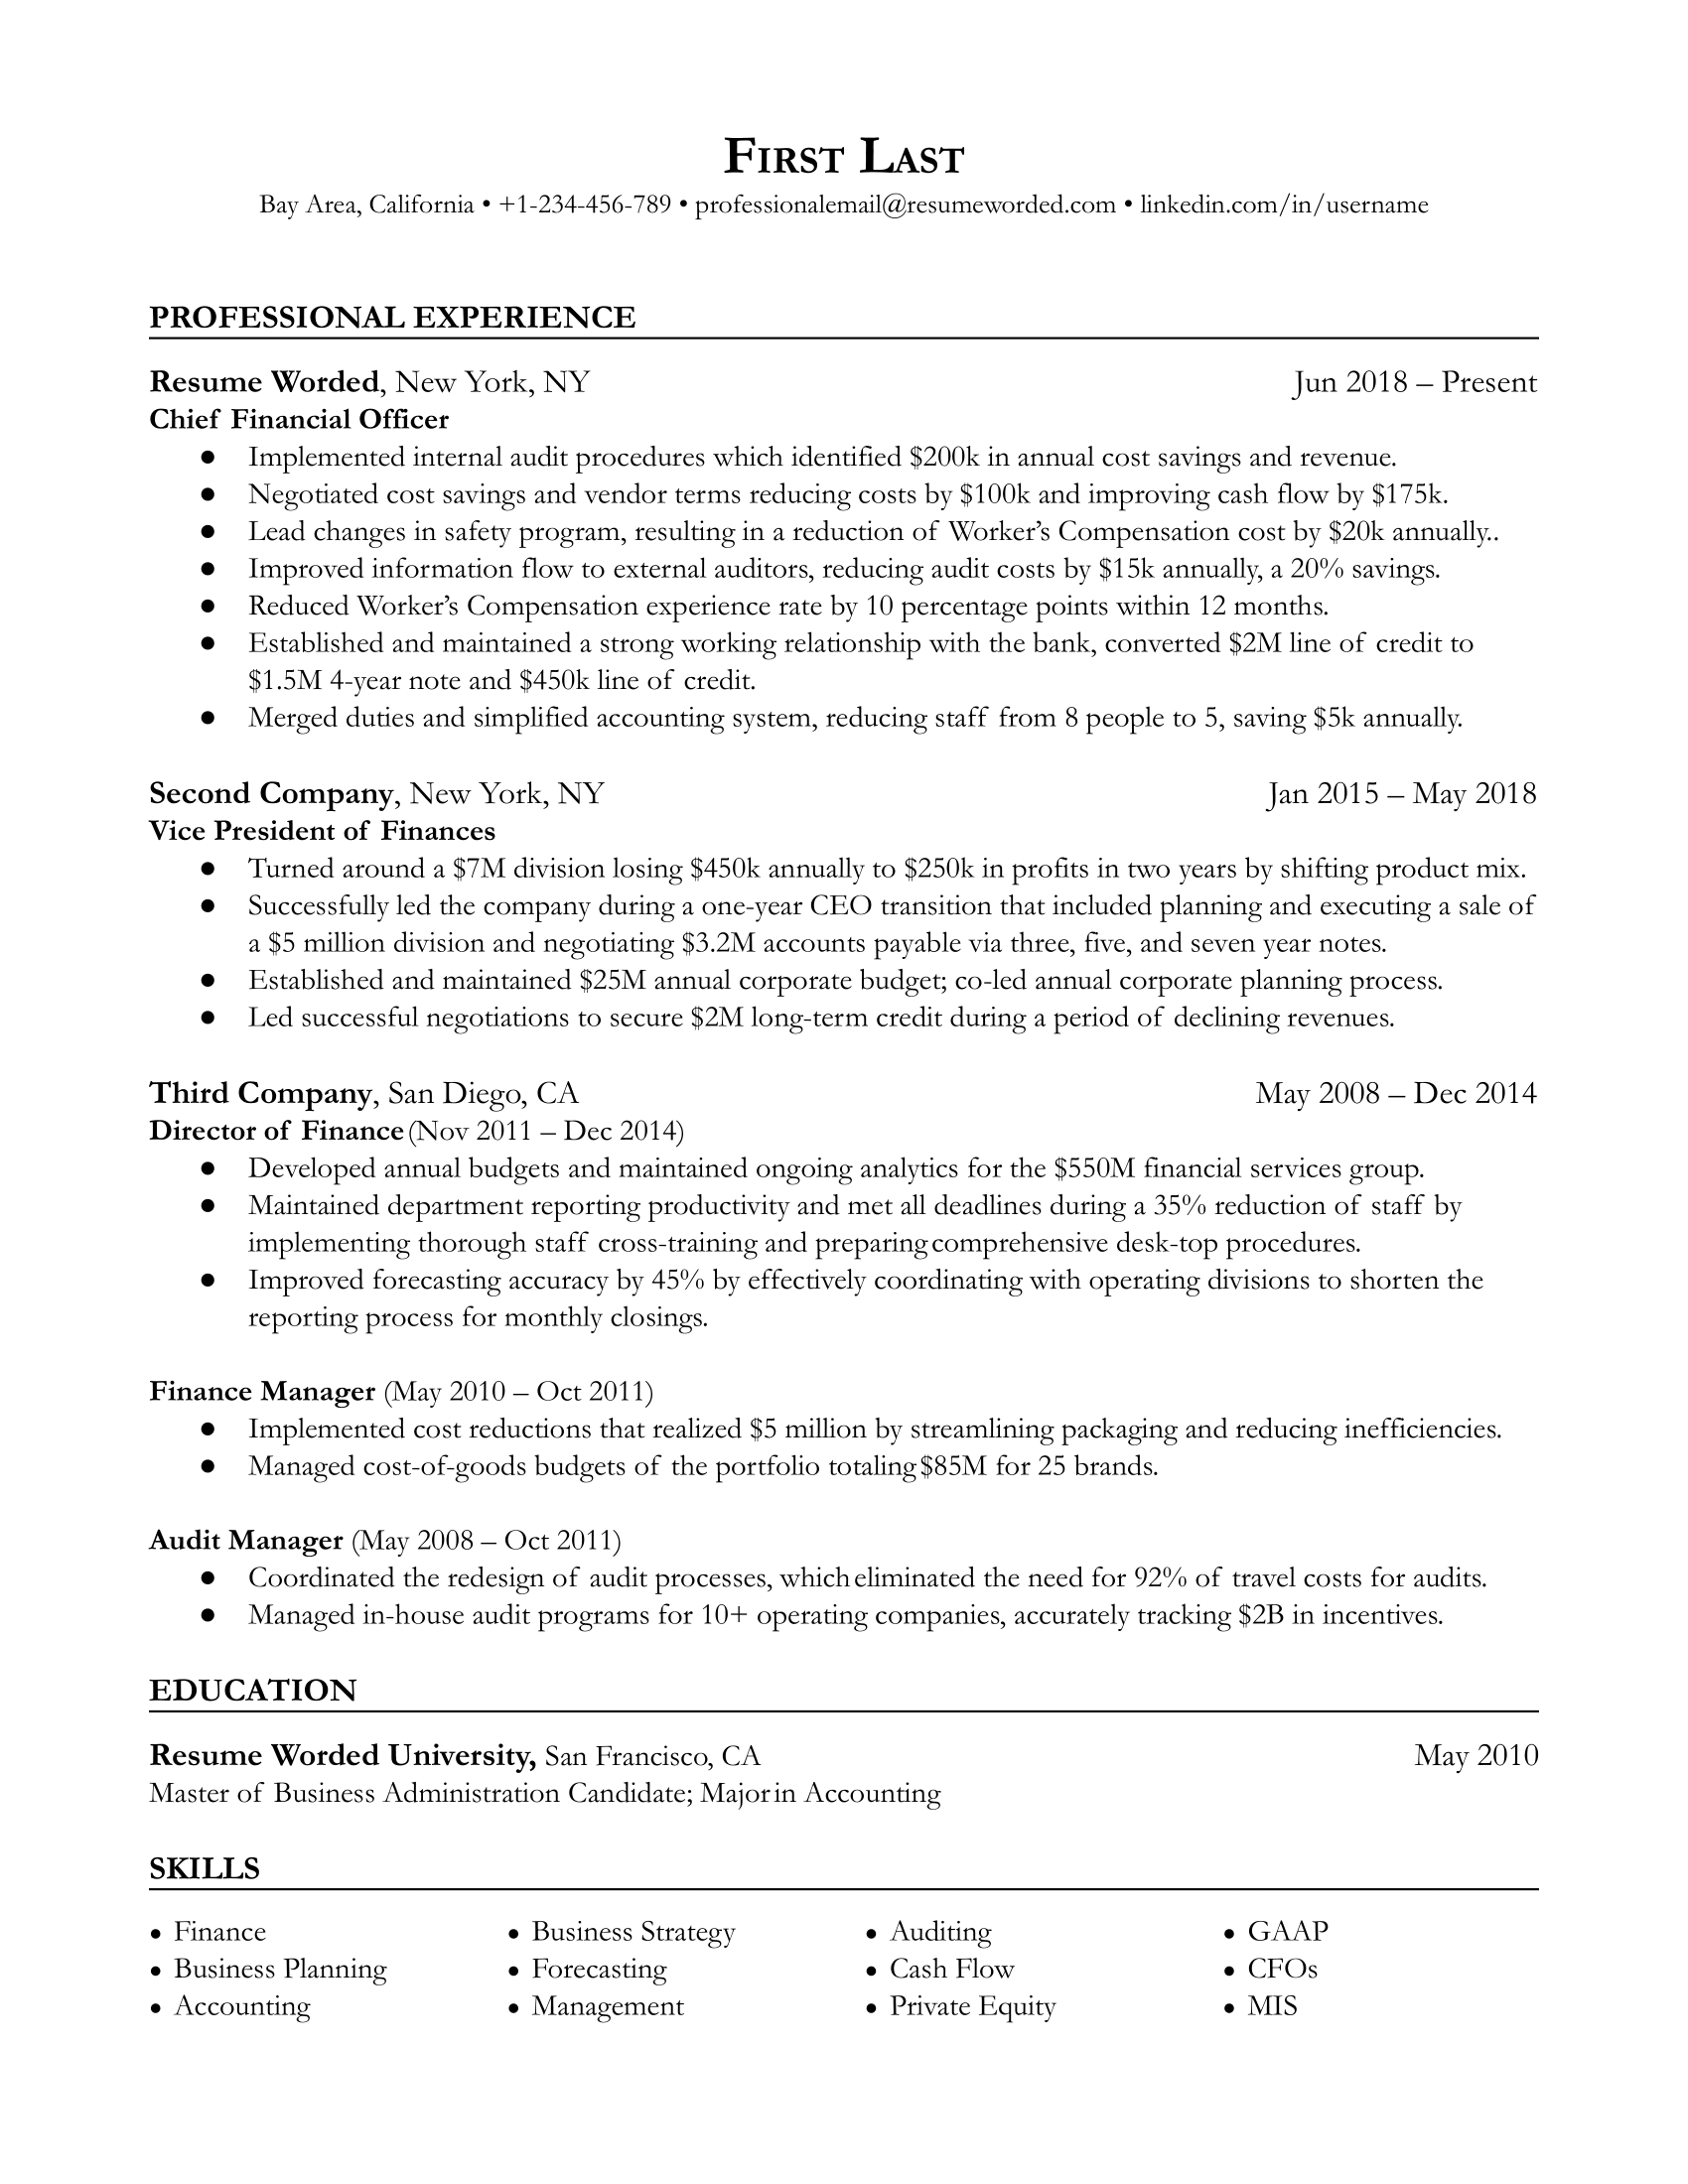 Chief Financial Officer resume template example with strong action verbs and targeted list of skills